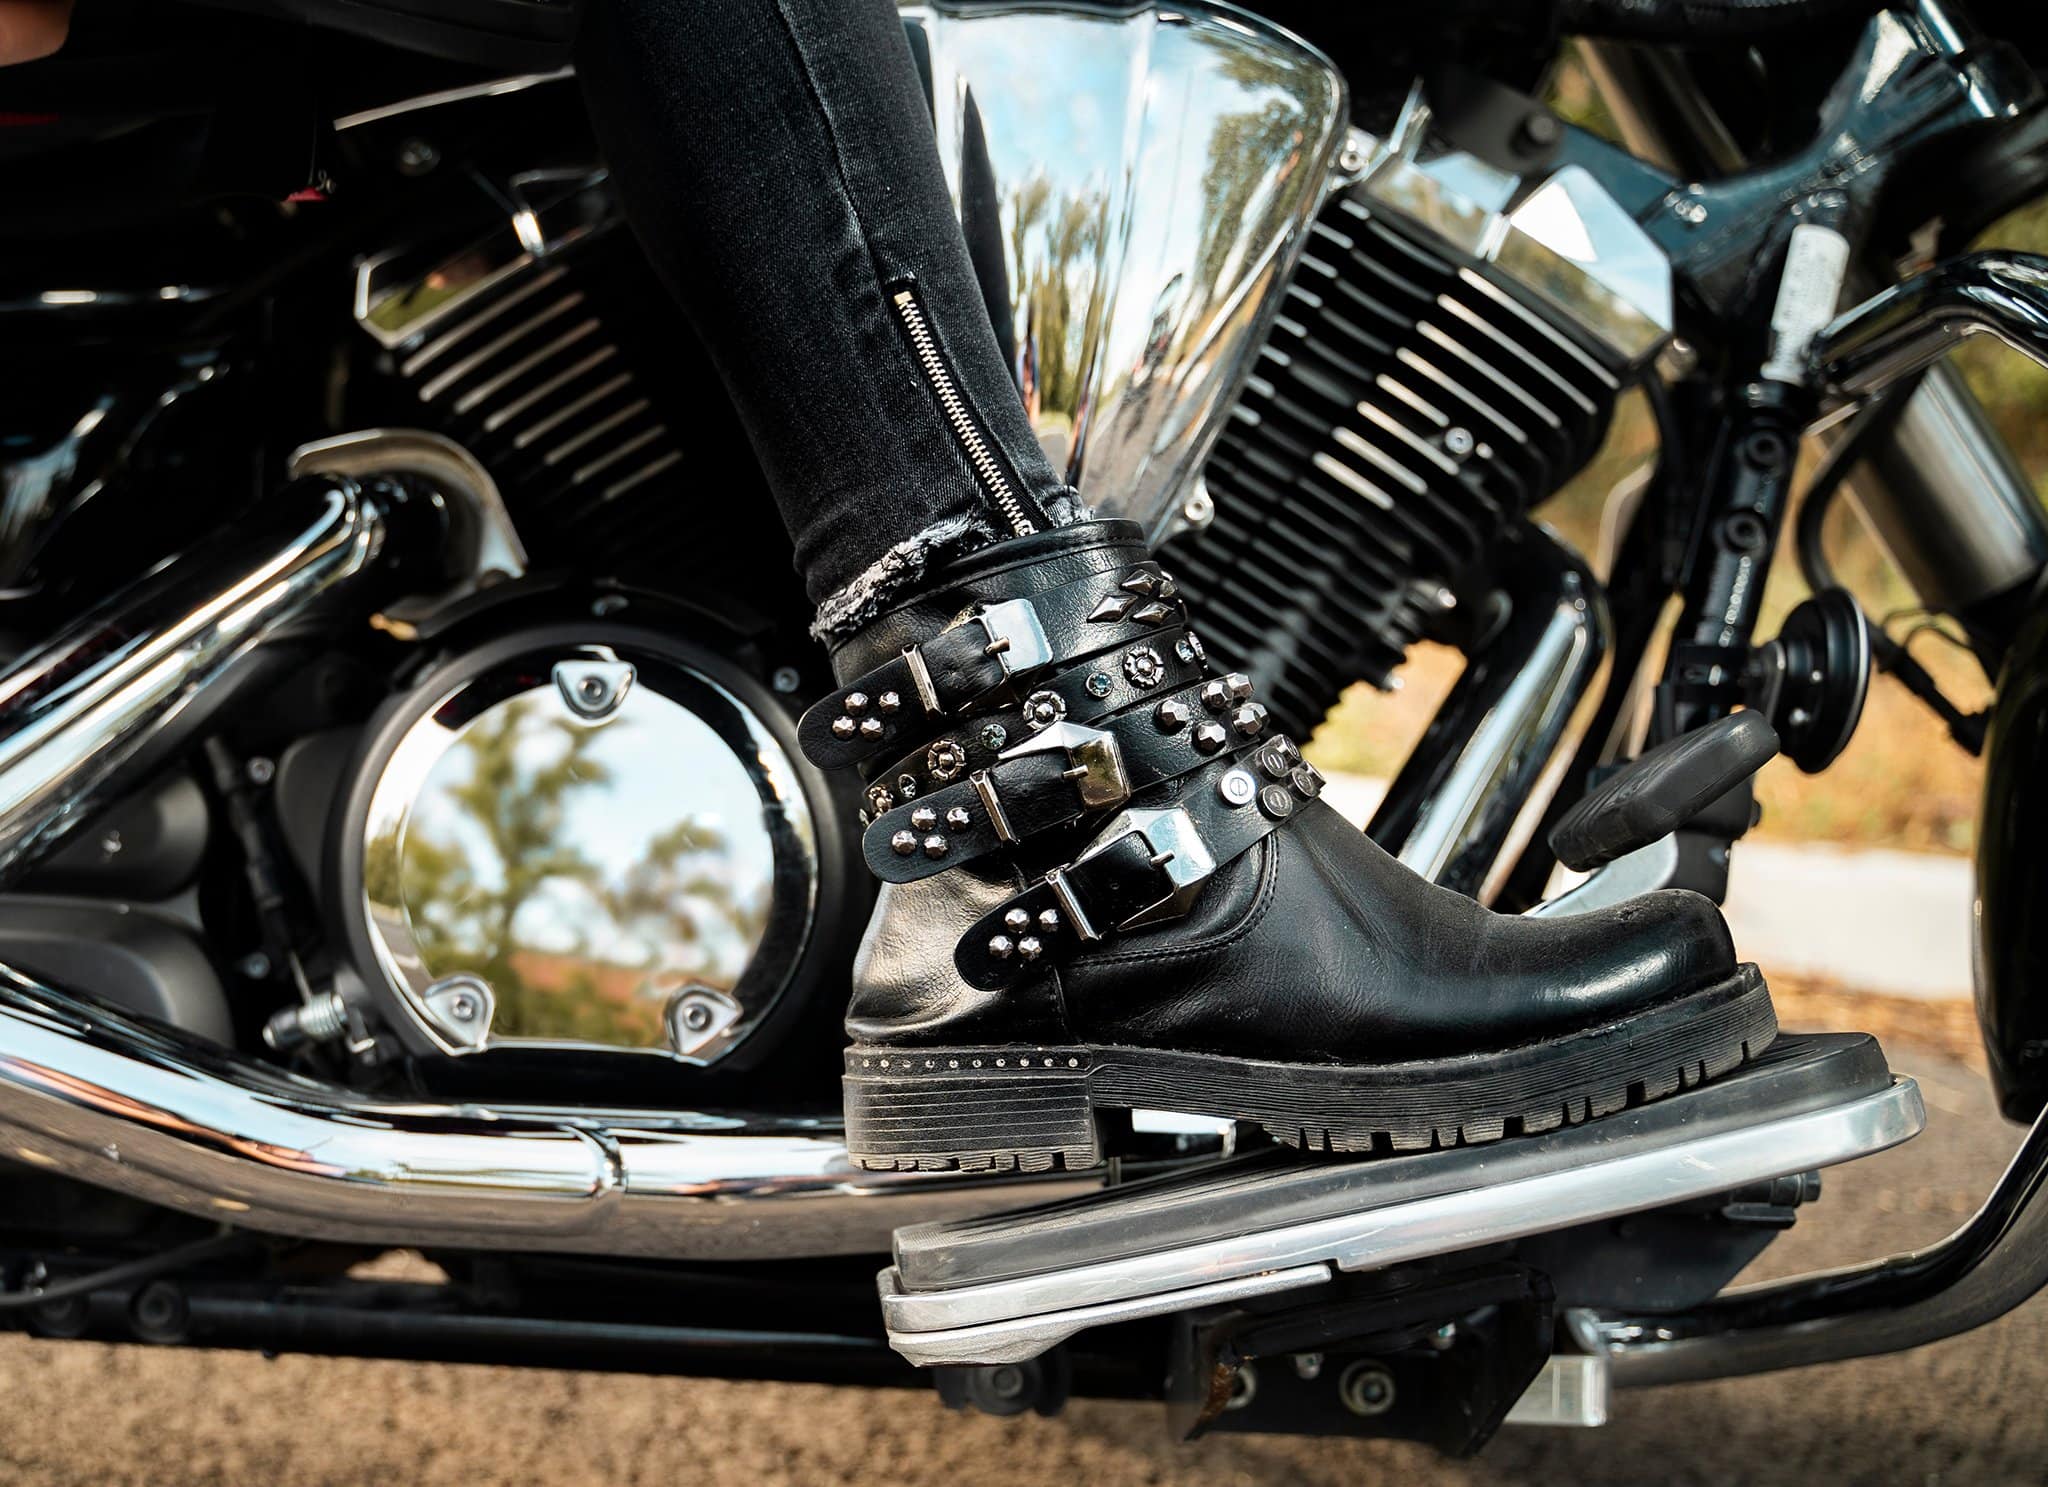 There are different types of motorcycle boots that can take you from casual rides to wild adventures